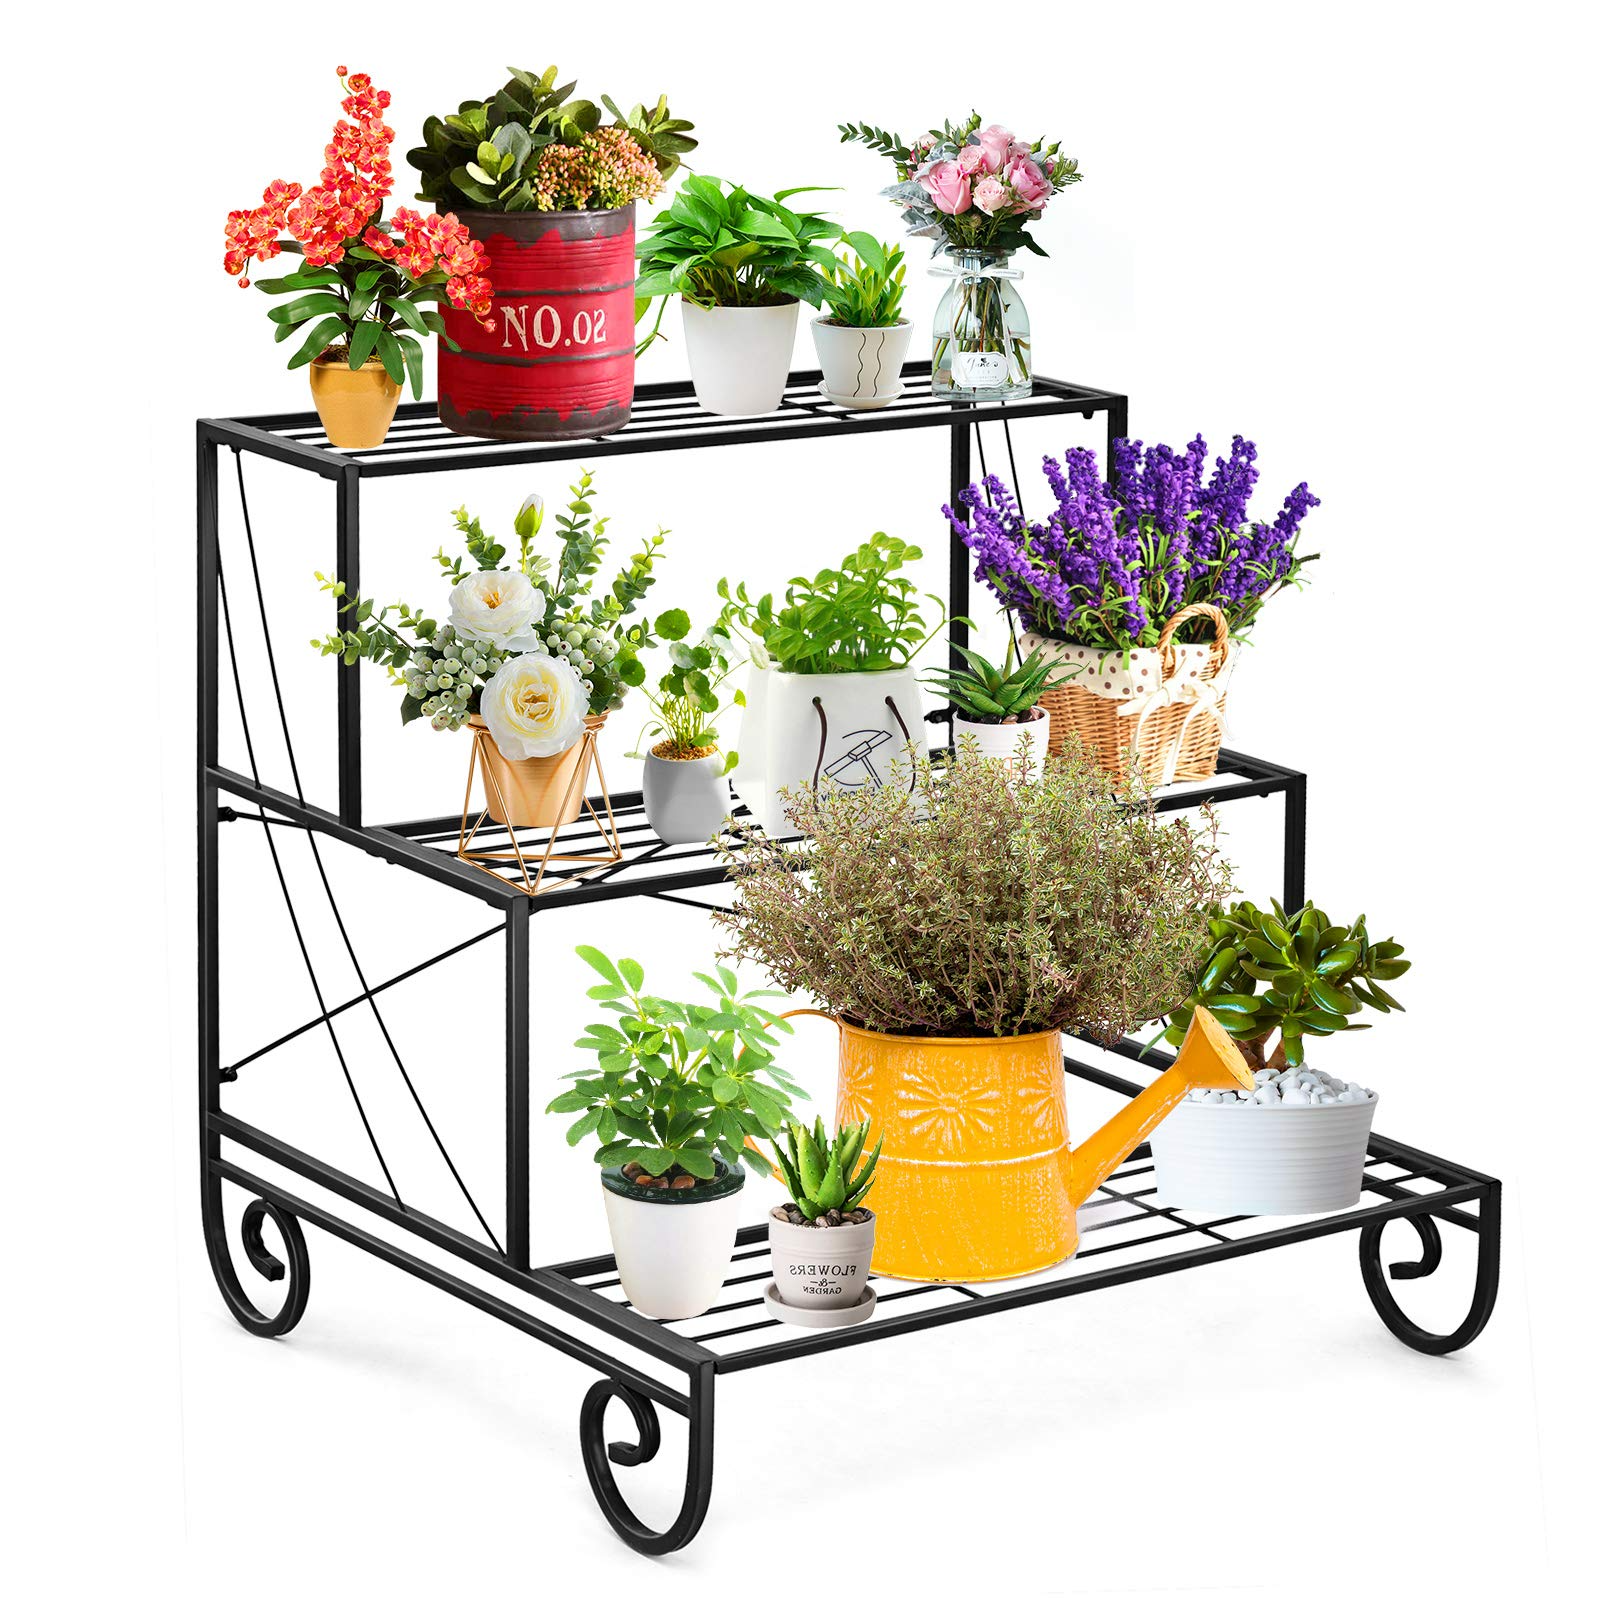 Giantex 3 Tier Metal Plant Stand, Stair Style Flower Pot Holder